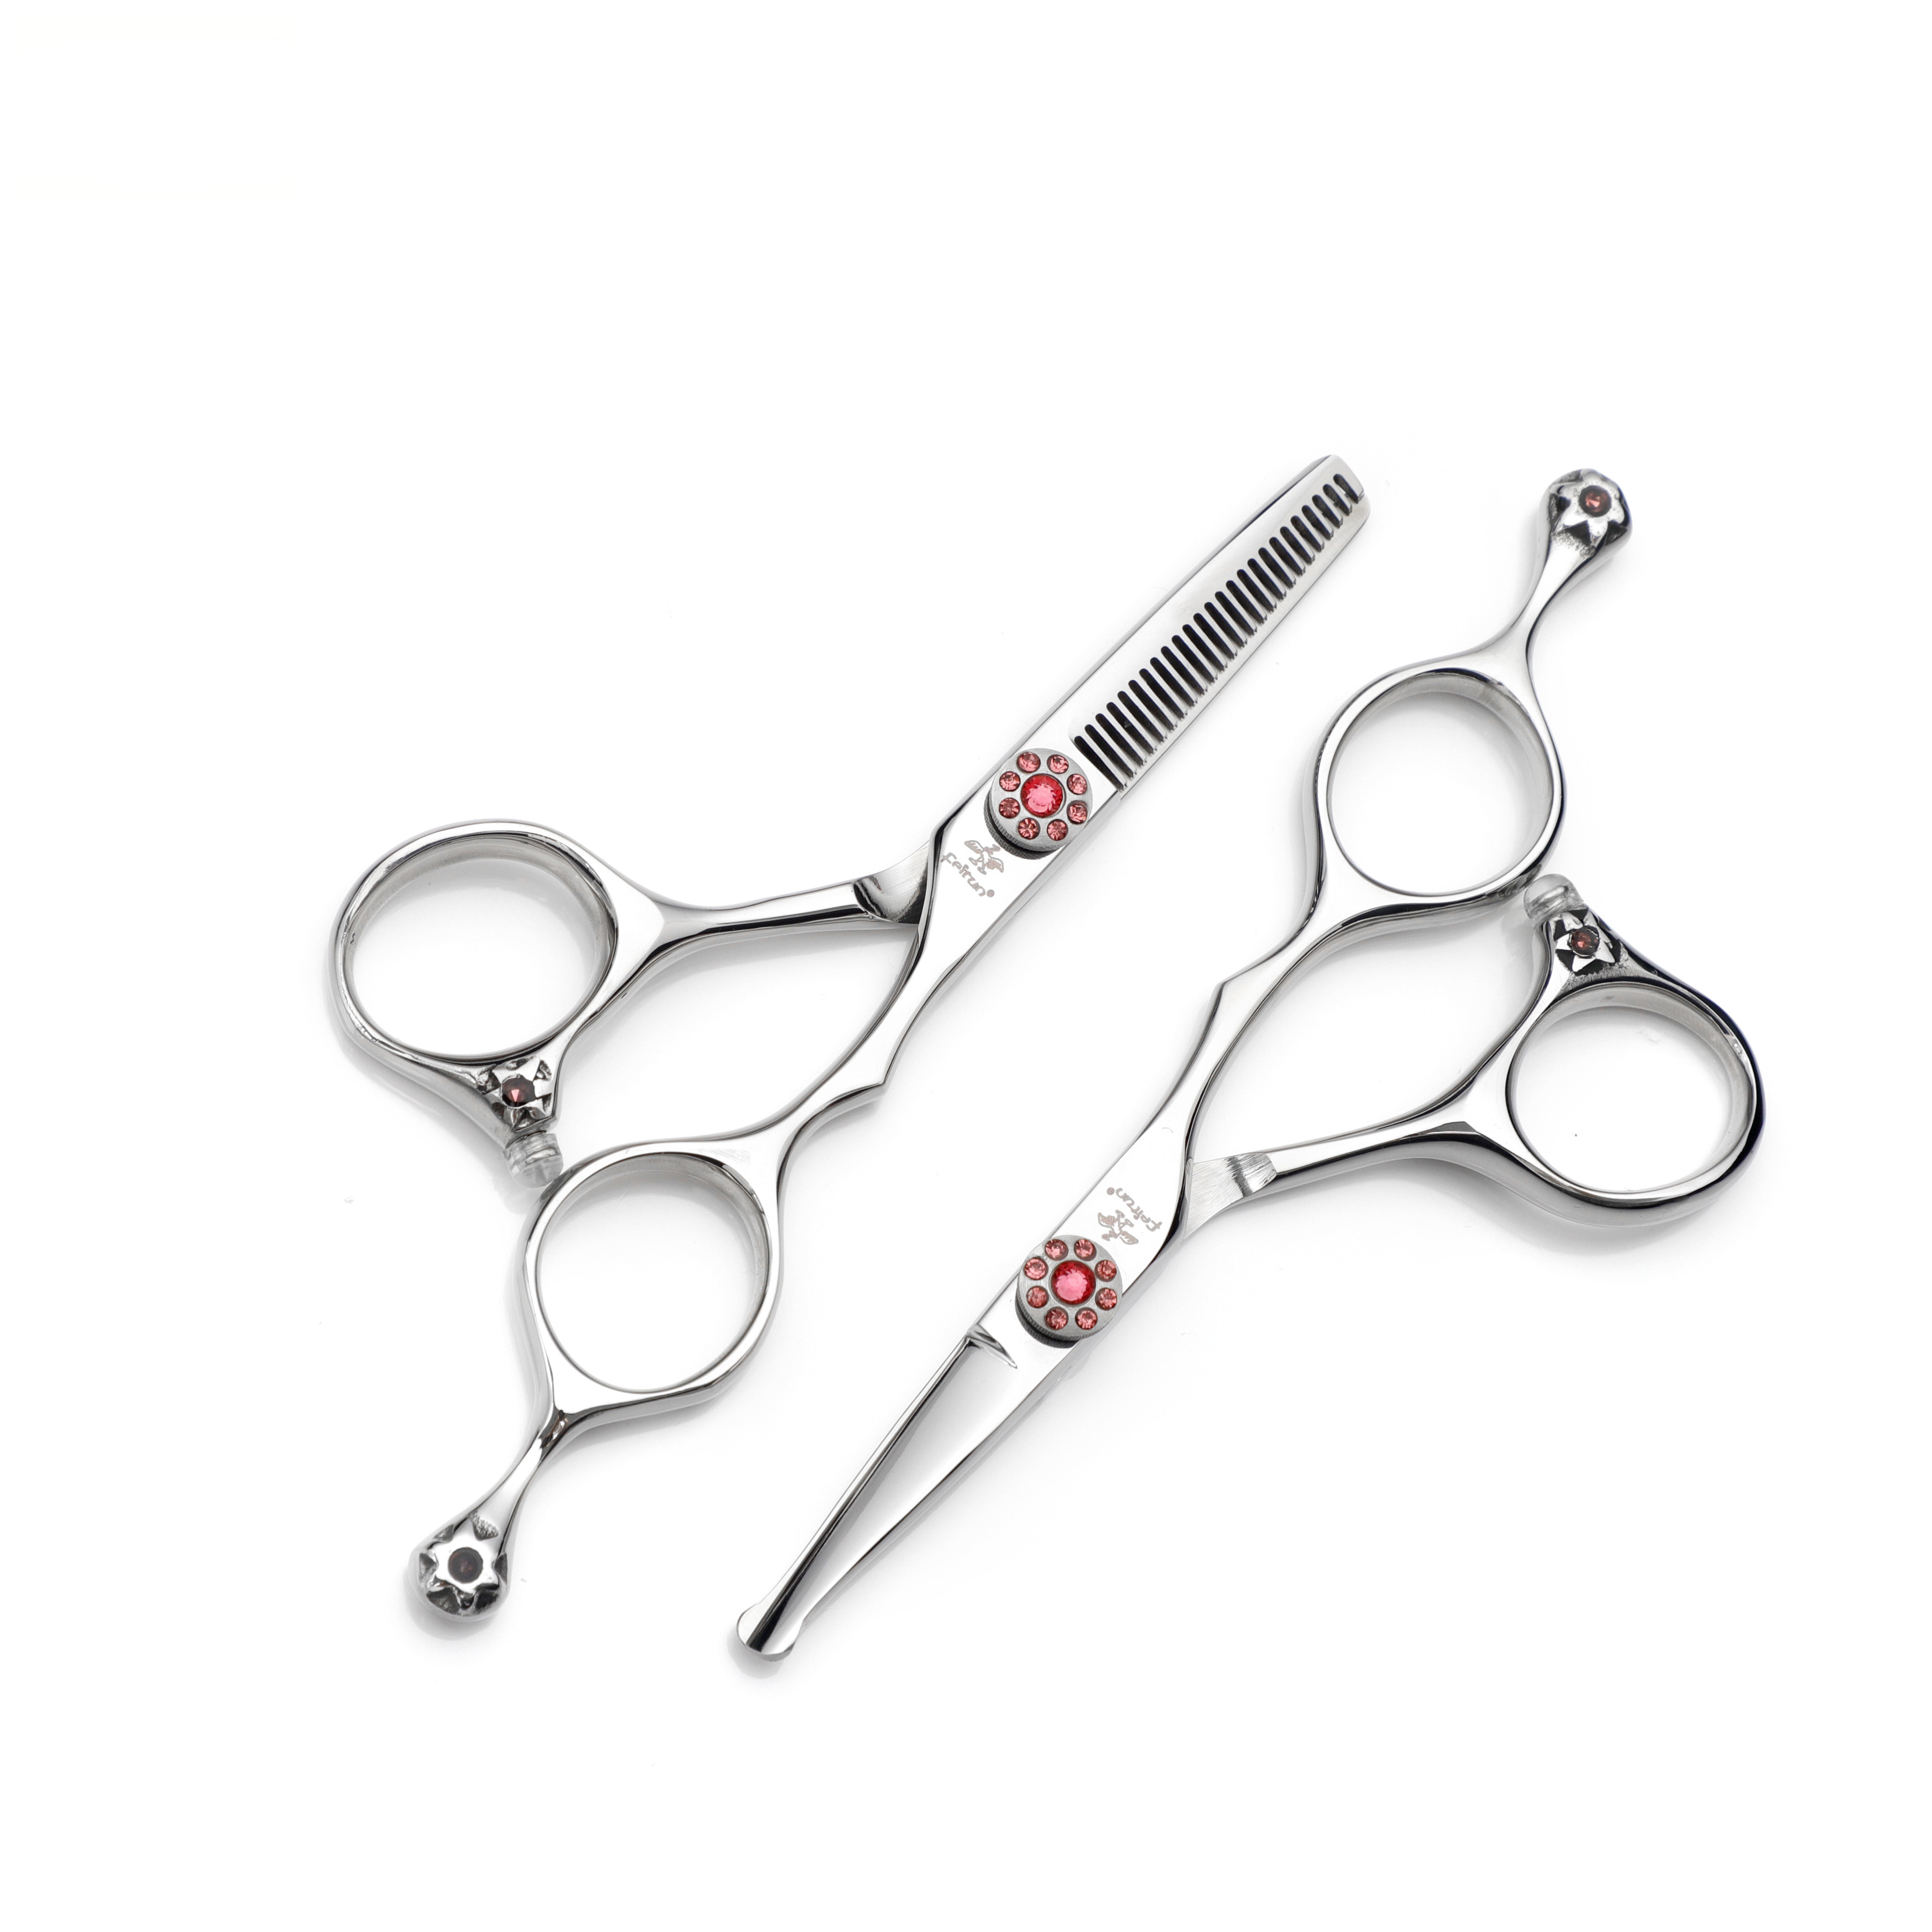 How to use pet shears to shear cats?